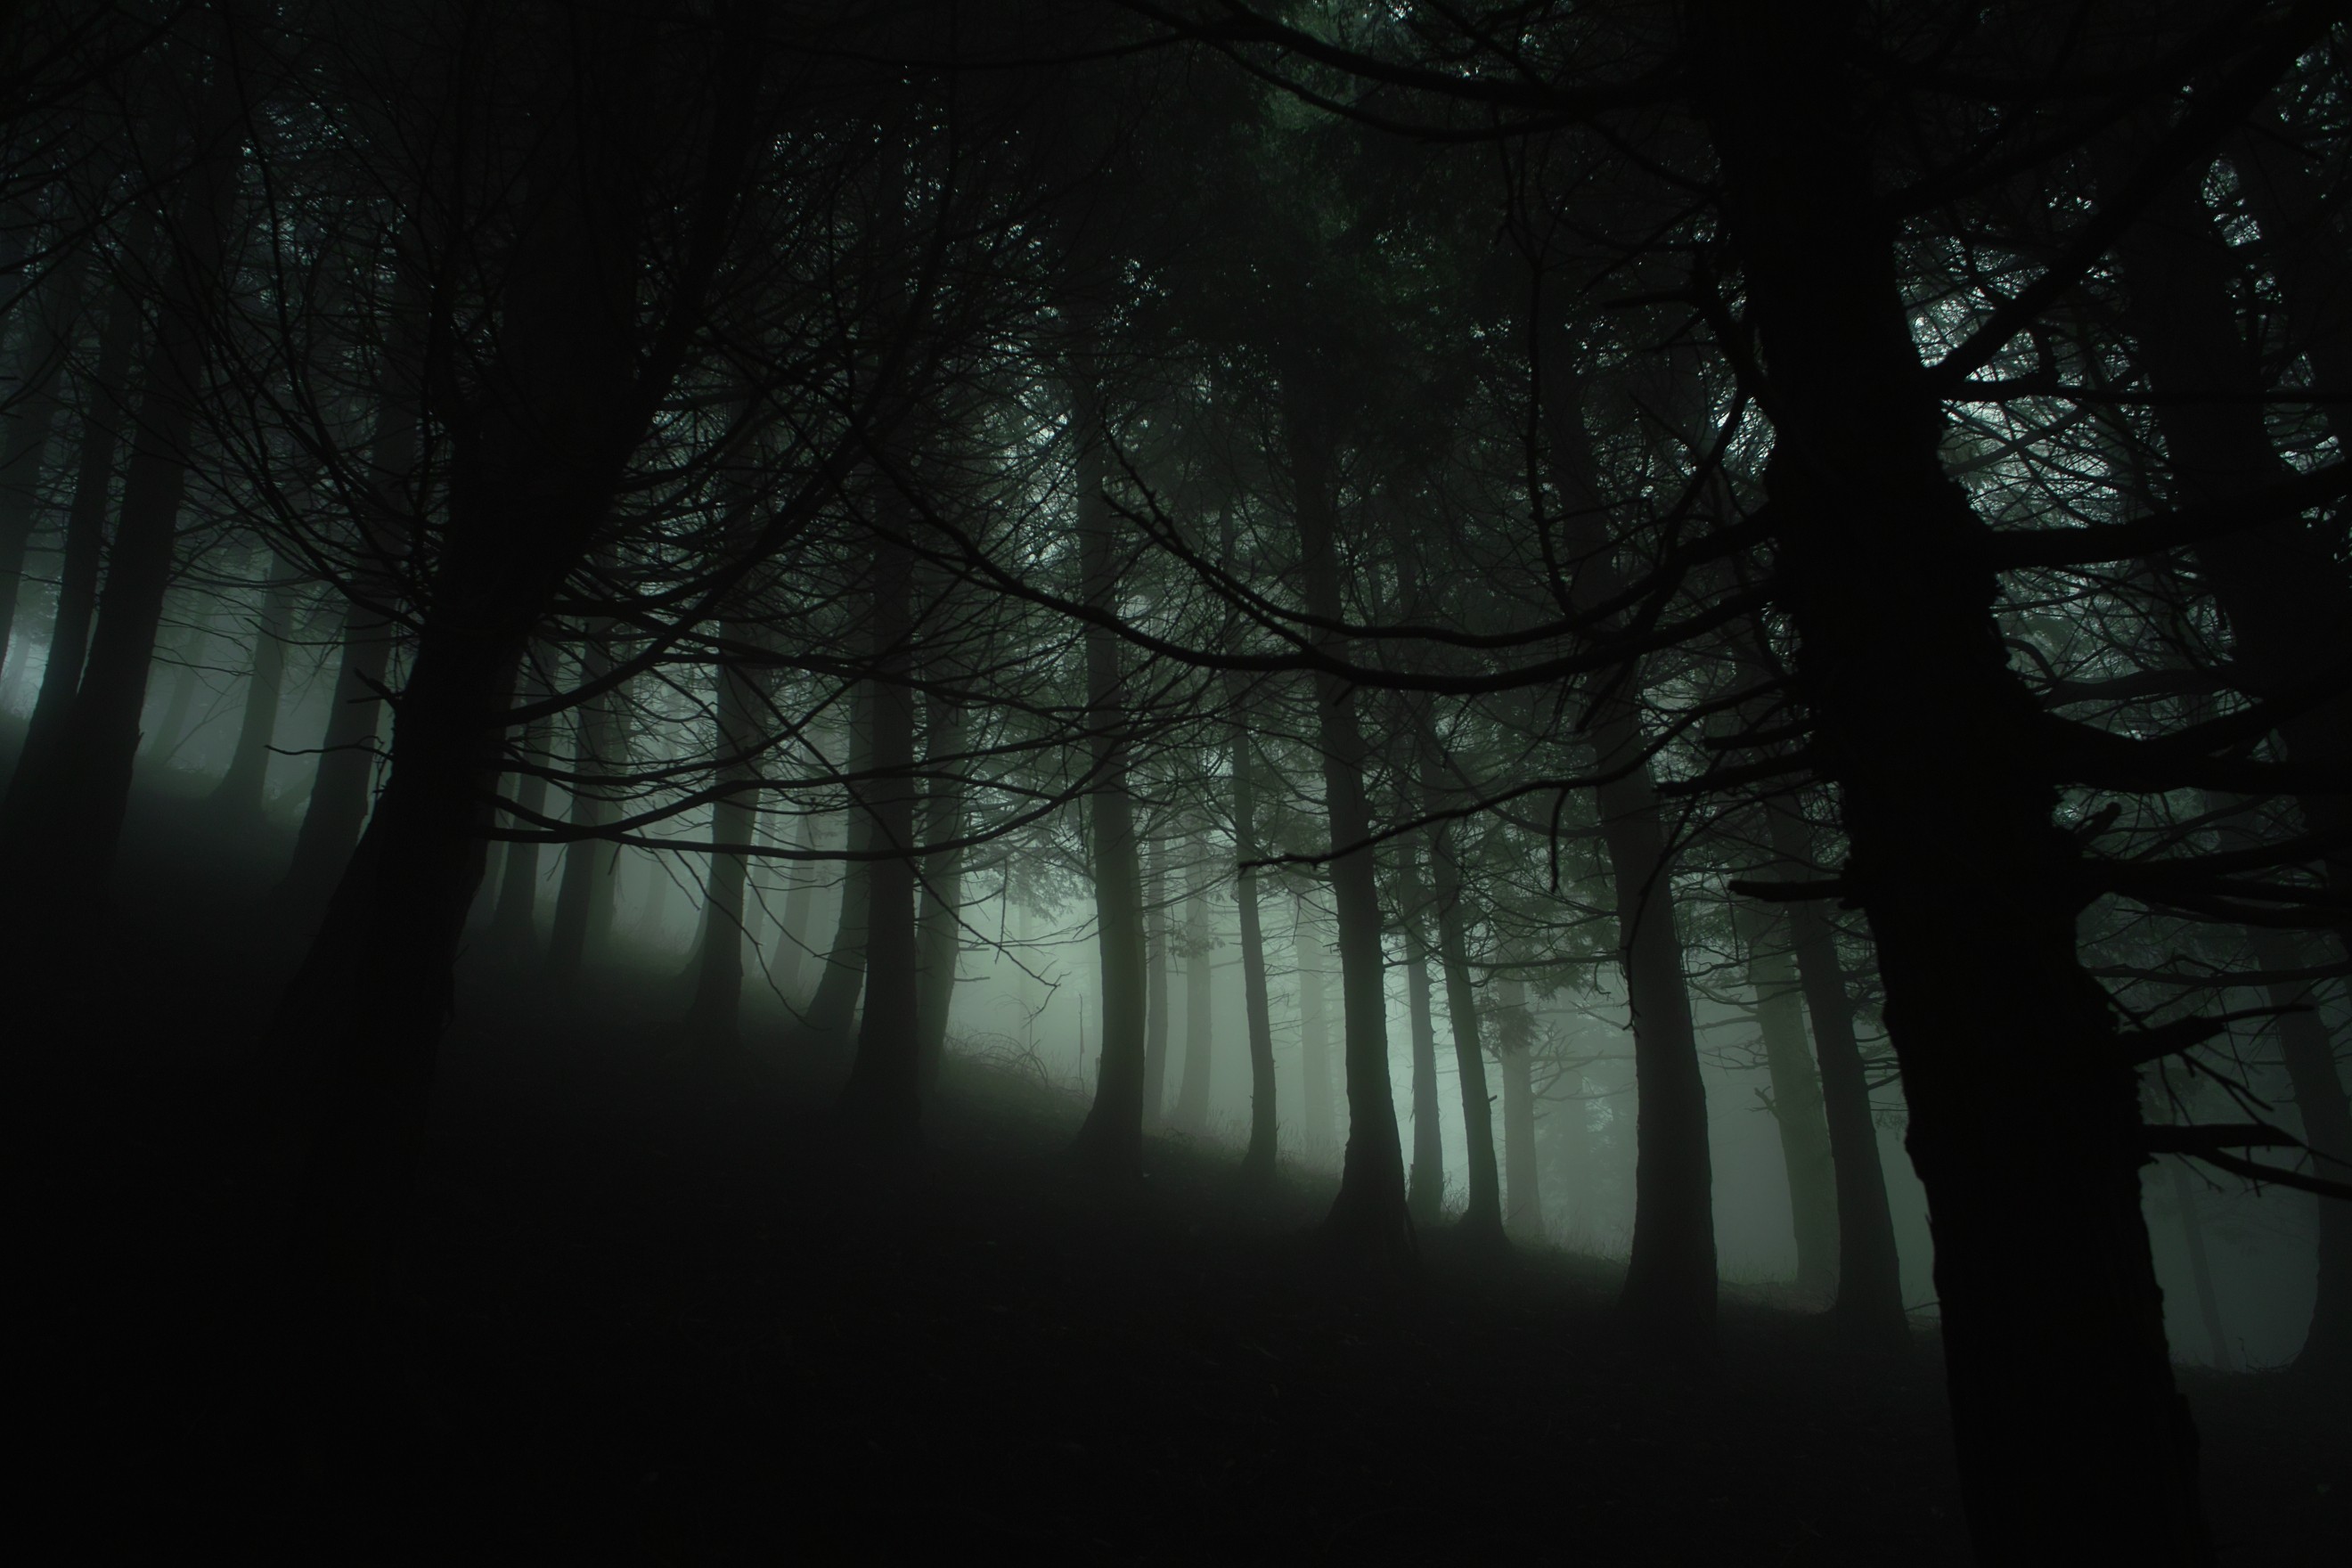 General 2640x1760 nature trees forest branch wood mist leaves silhouette hills dark creepy